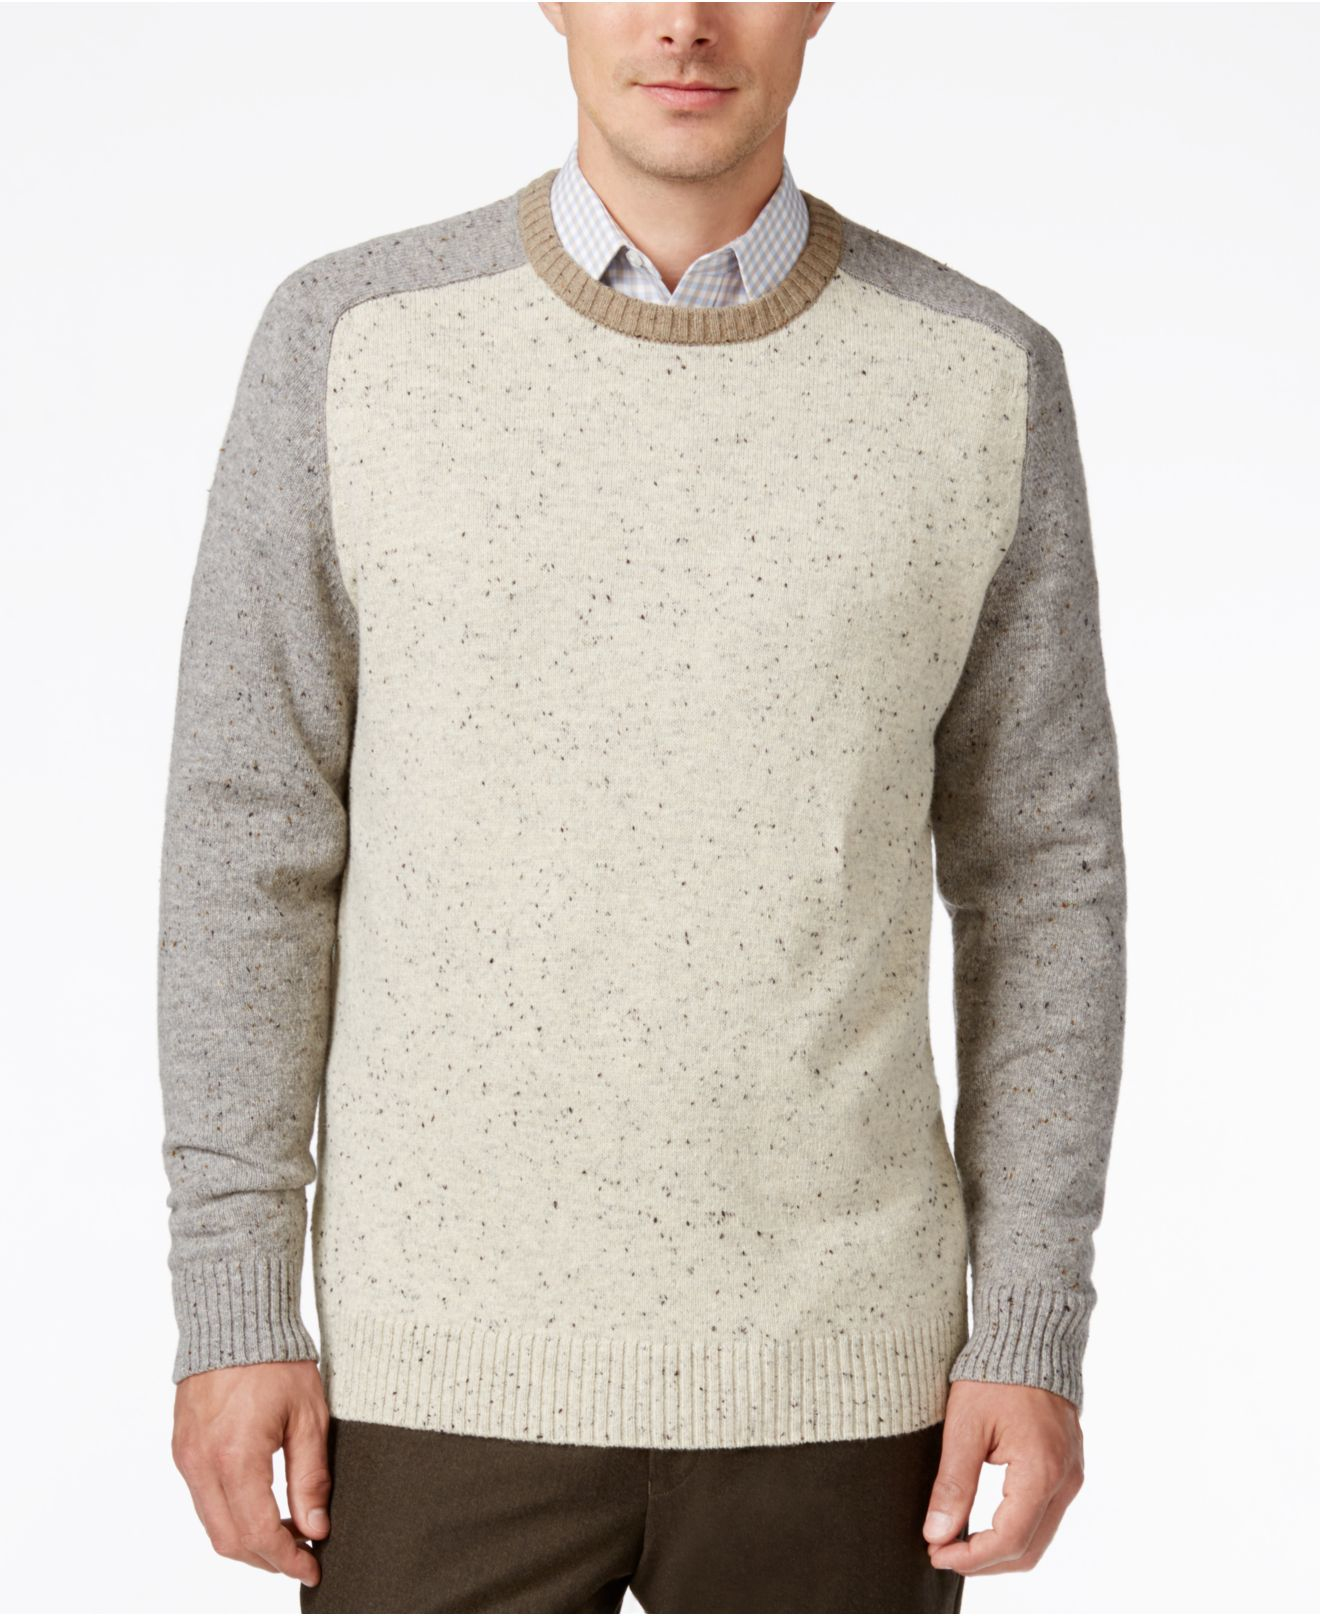 Lyst - Tricots St Raphael Men's Colorblocked Nep Baseball Sweater in ...